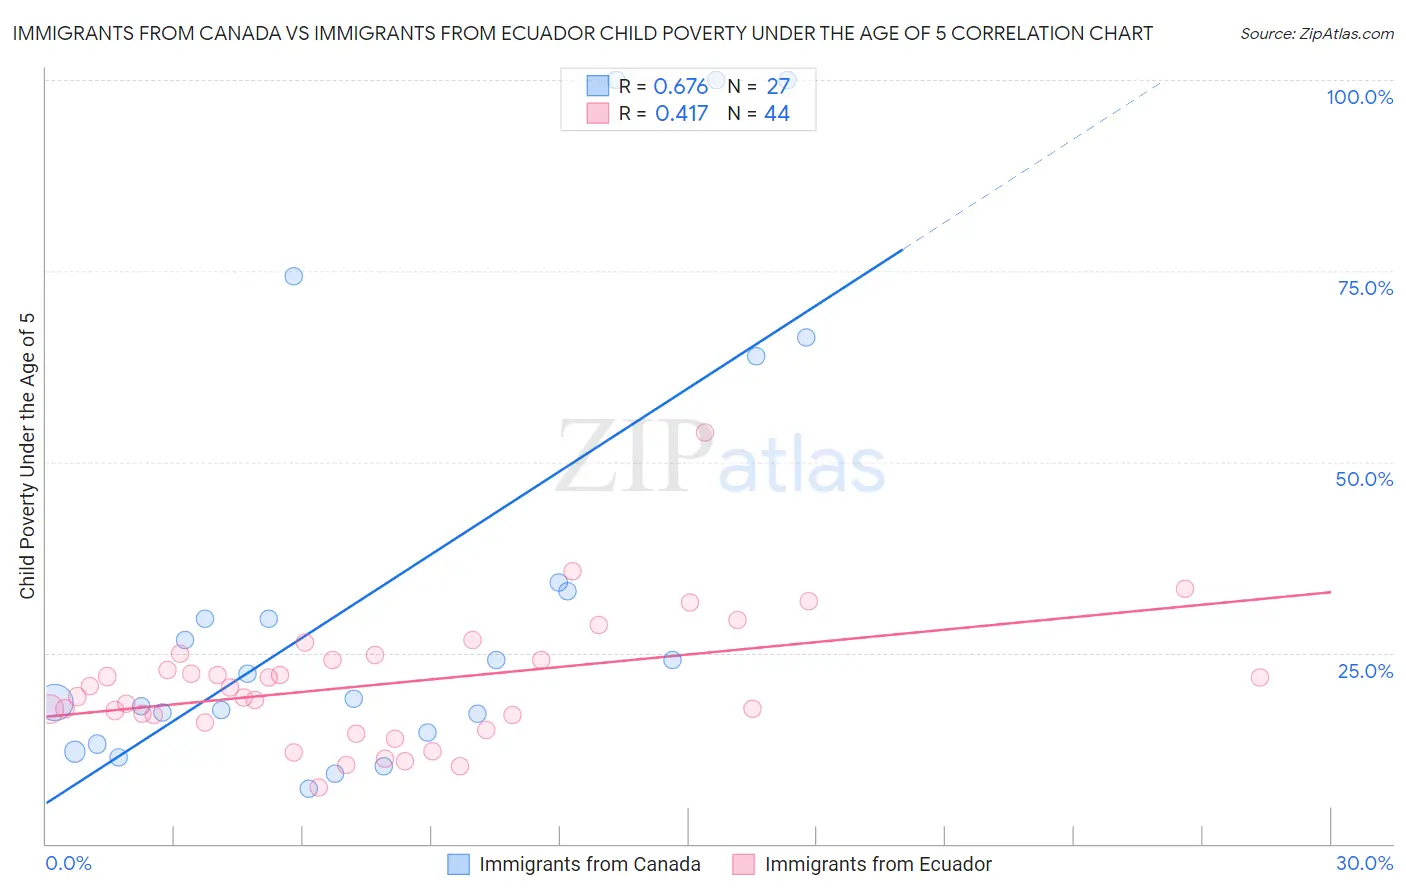 Immigrants from Canada vs Immigrants from Ecuador Child Poverty Under the Age of 5